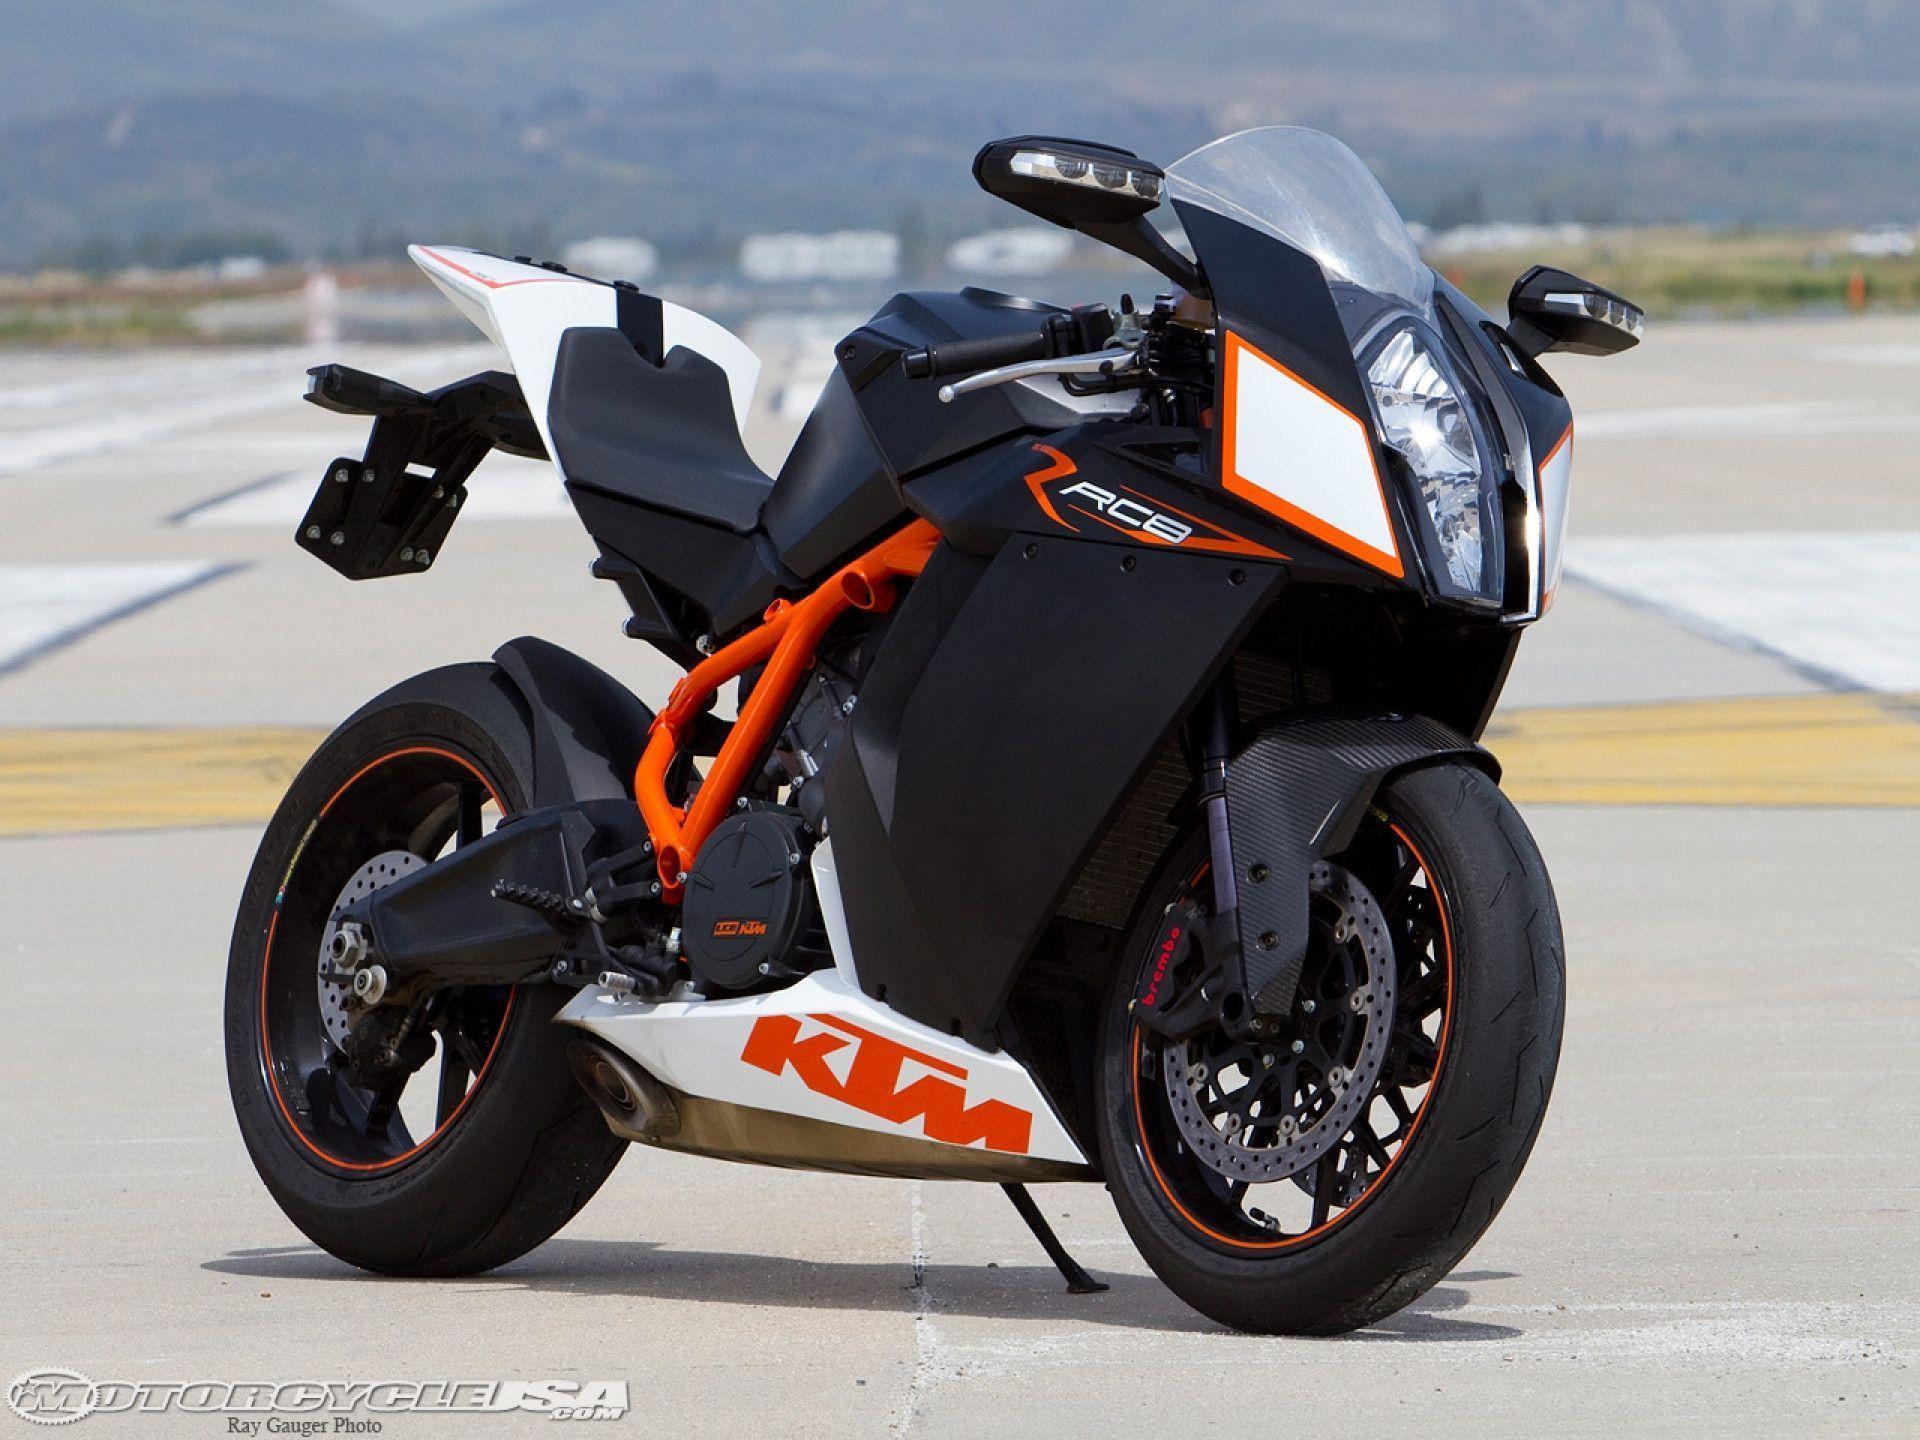 ktm rc8r track smackdown picture 1 of 14 motorcycle usa